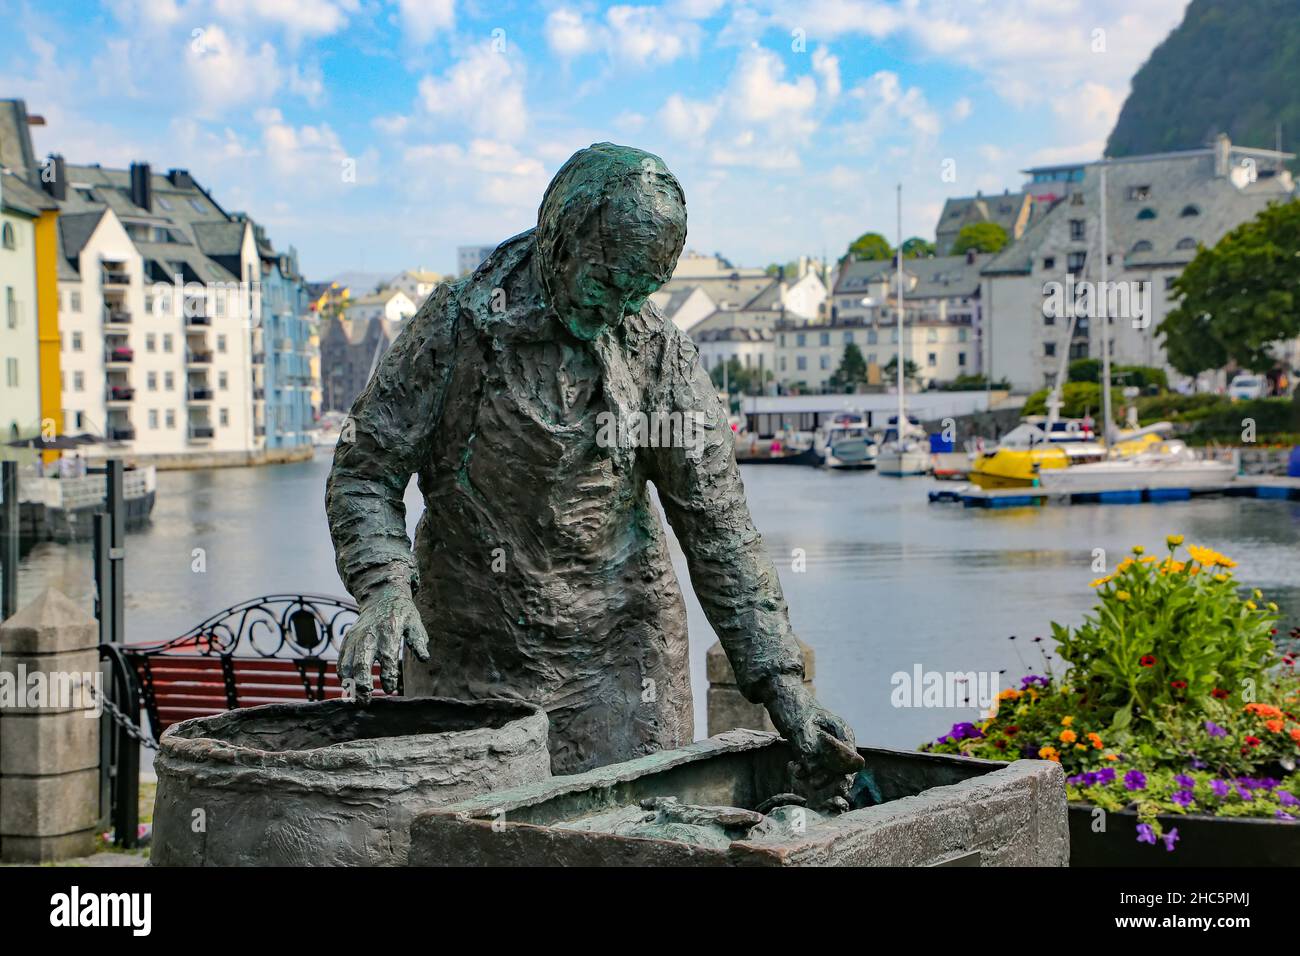 Sildekona (Herring Woman or Fish Lady) Statue with one of the canals with boats and art nouveau buildings in the background, Alesund, Norway. Stock Photo